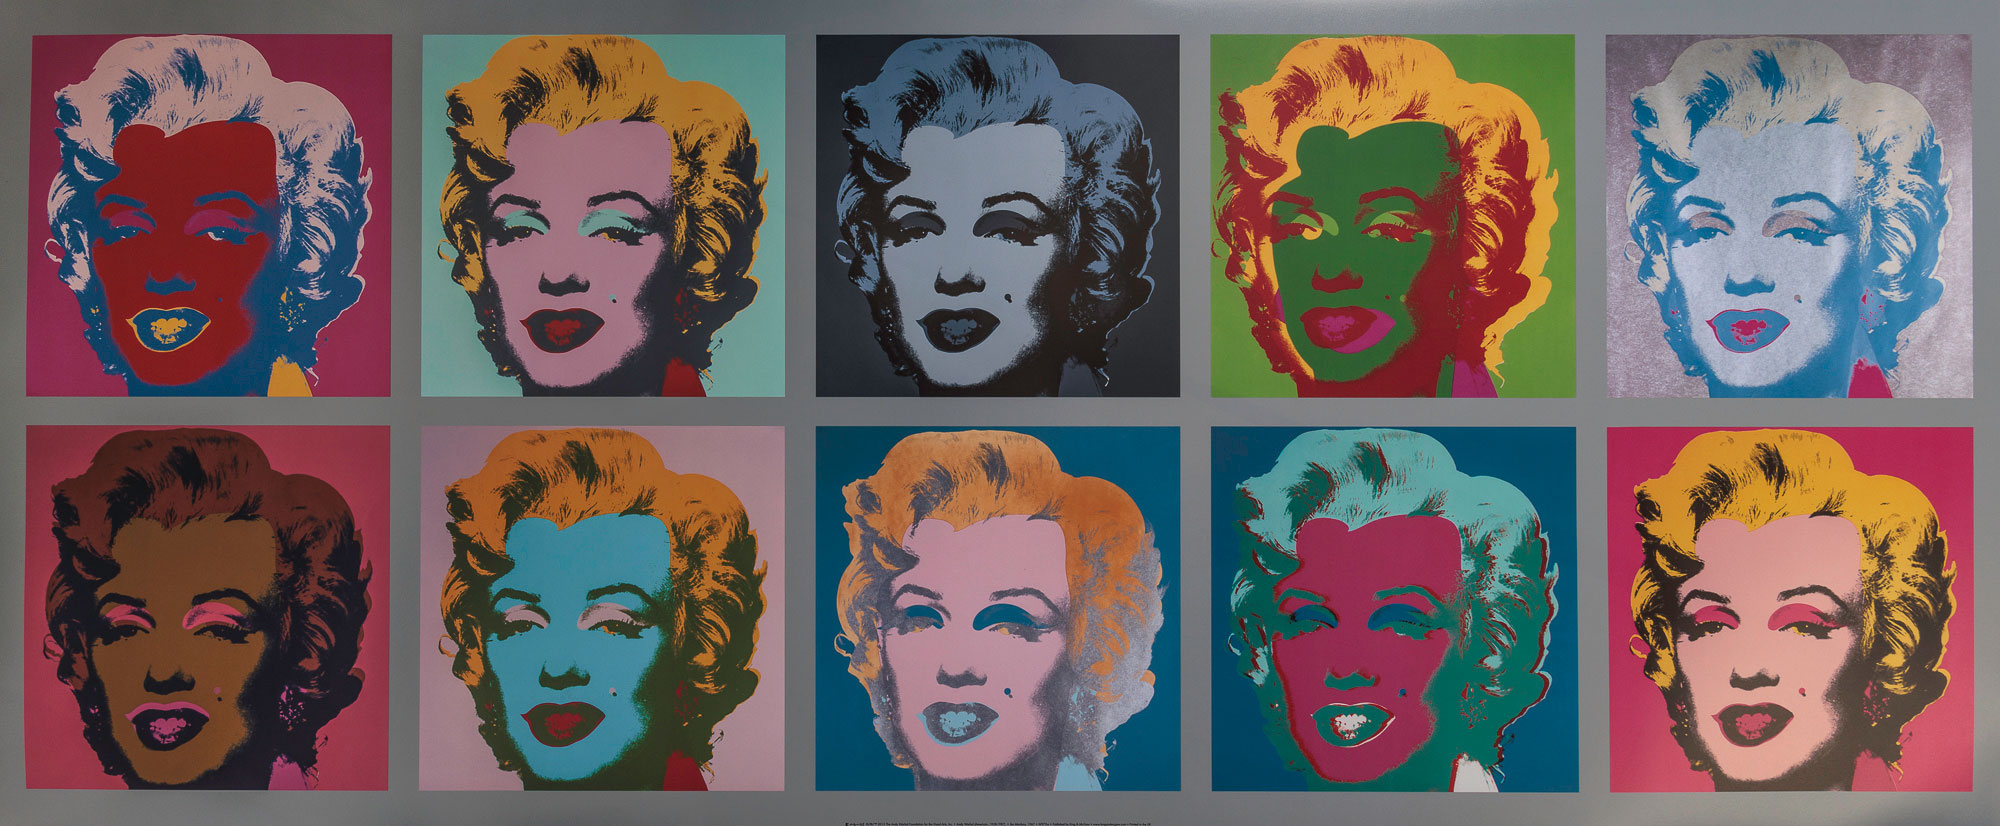 Highland Spille computerspil Lys Andy Warhol poster : 10 Marilyns, Reproduction, Fine Art print